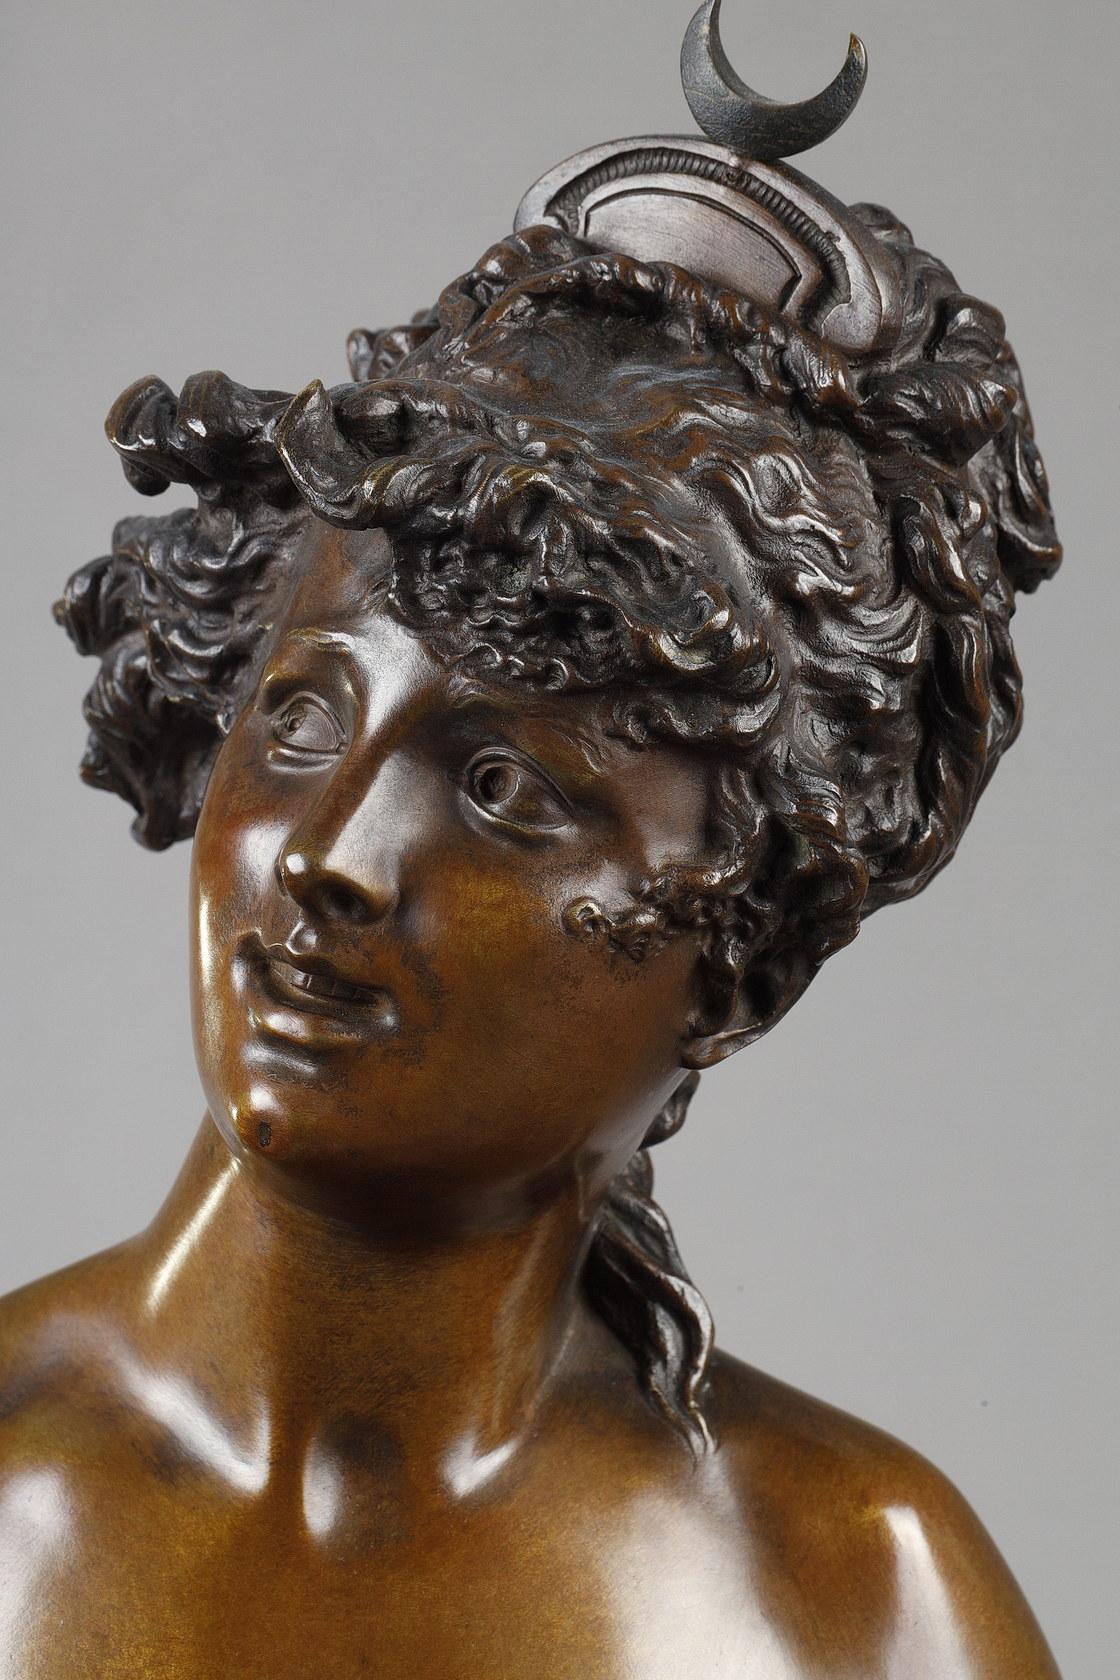 Diana with an arrow
by Albert-Ernest CARRIER-BELLEUSE (1824-1887)
 
Bronze sculpture with a dual light and dark brown patina
signed on the base 